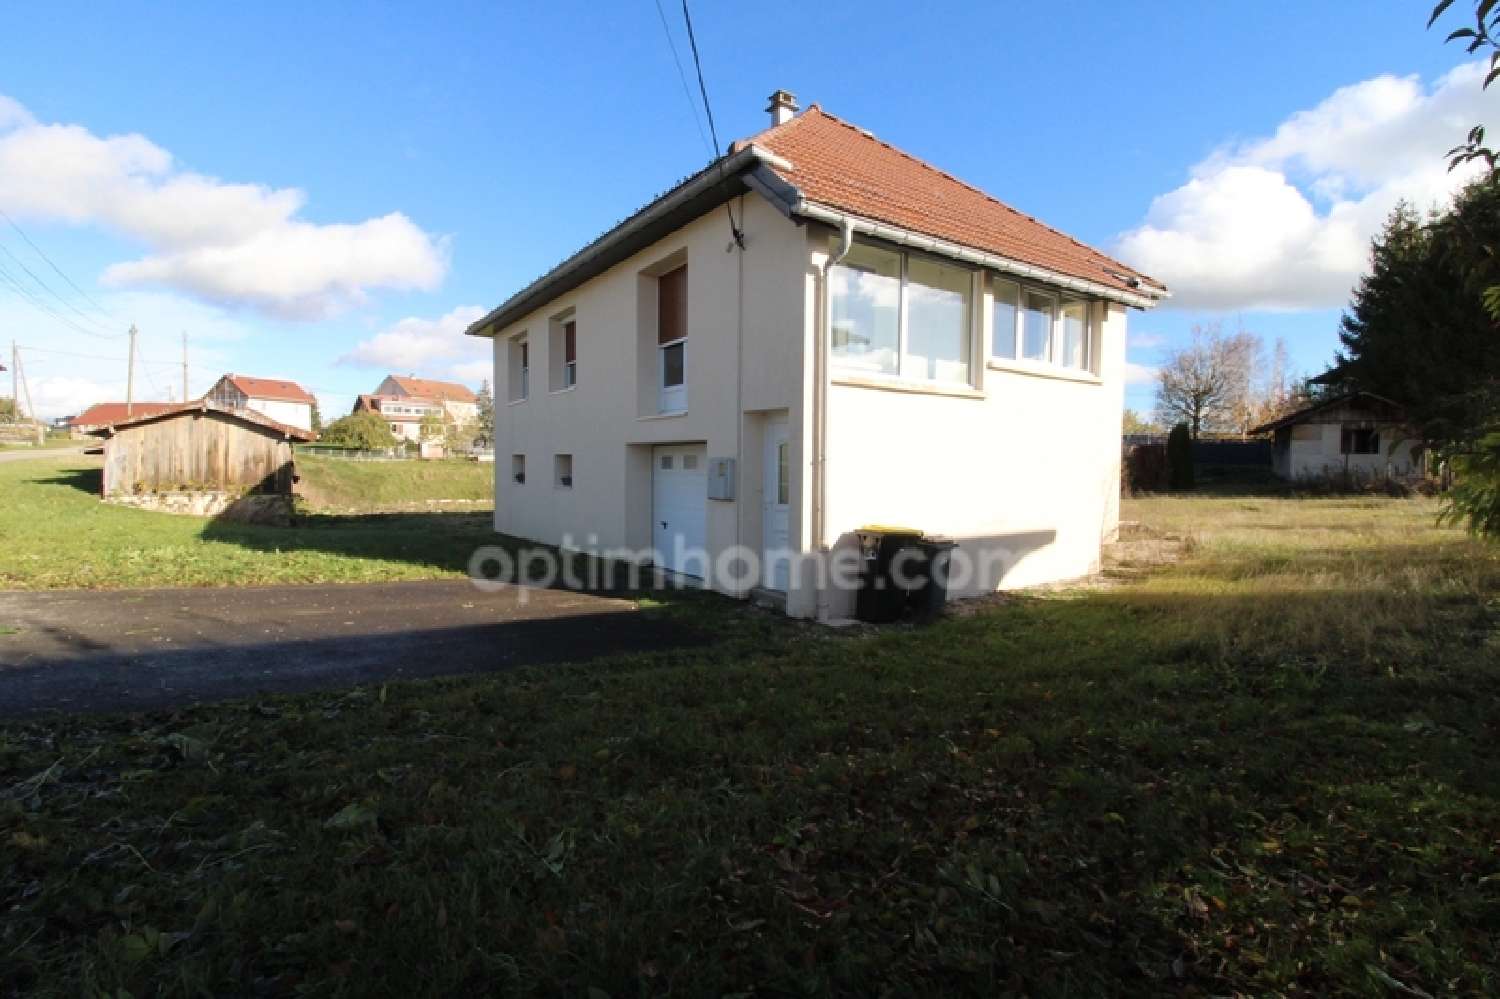  for sale house Le Russey Doubs 3